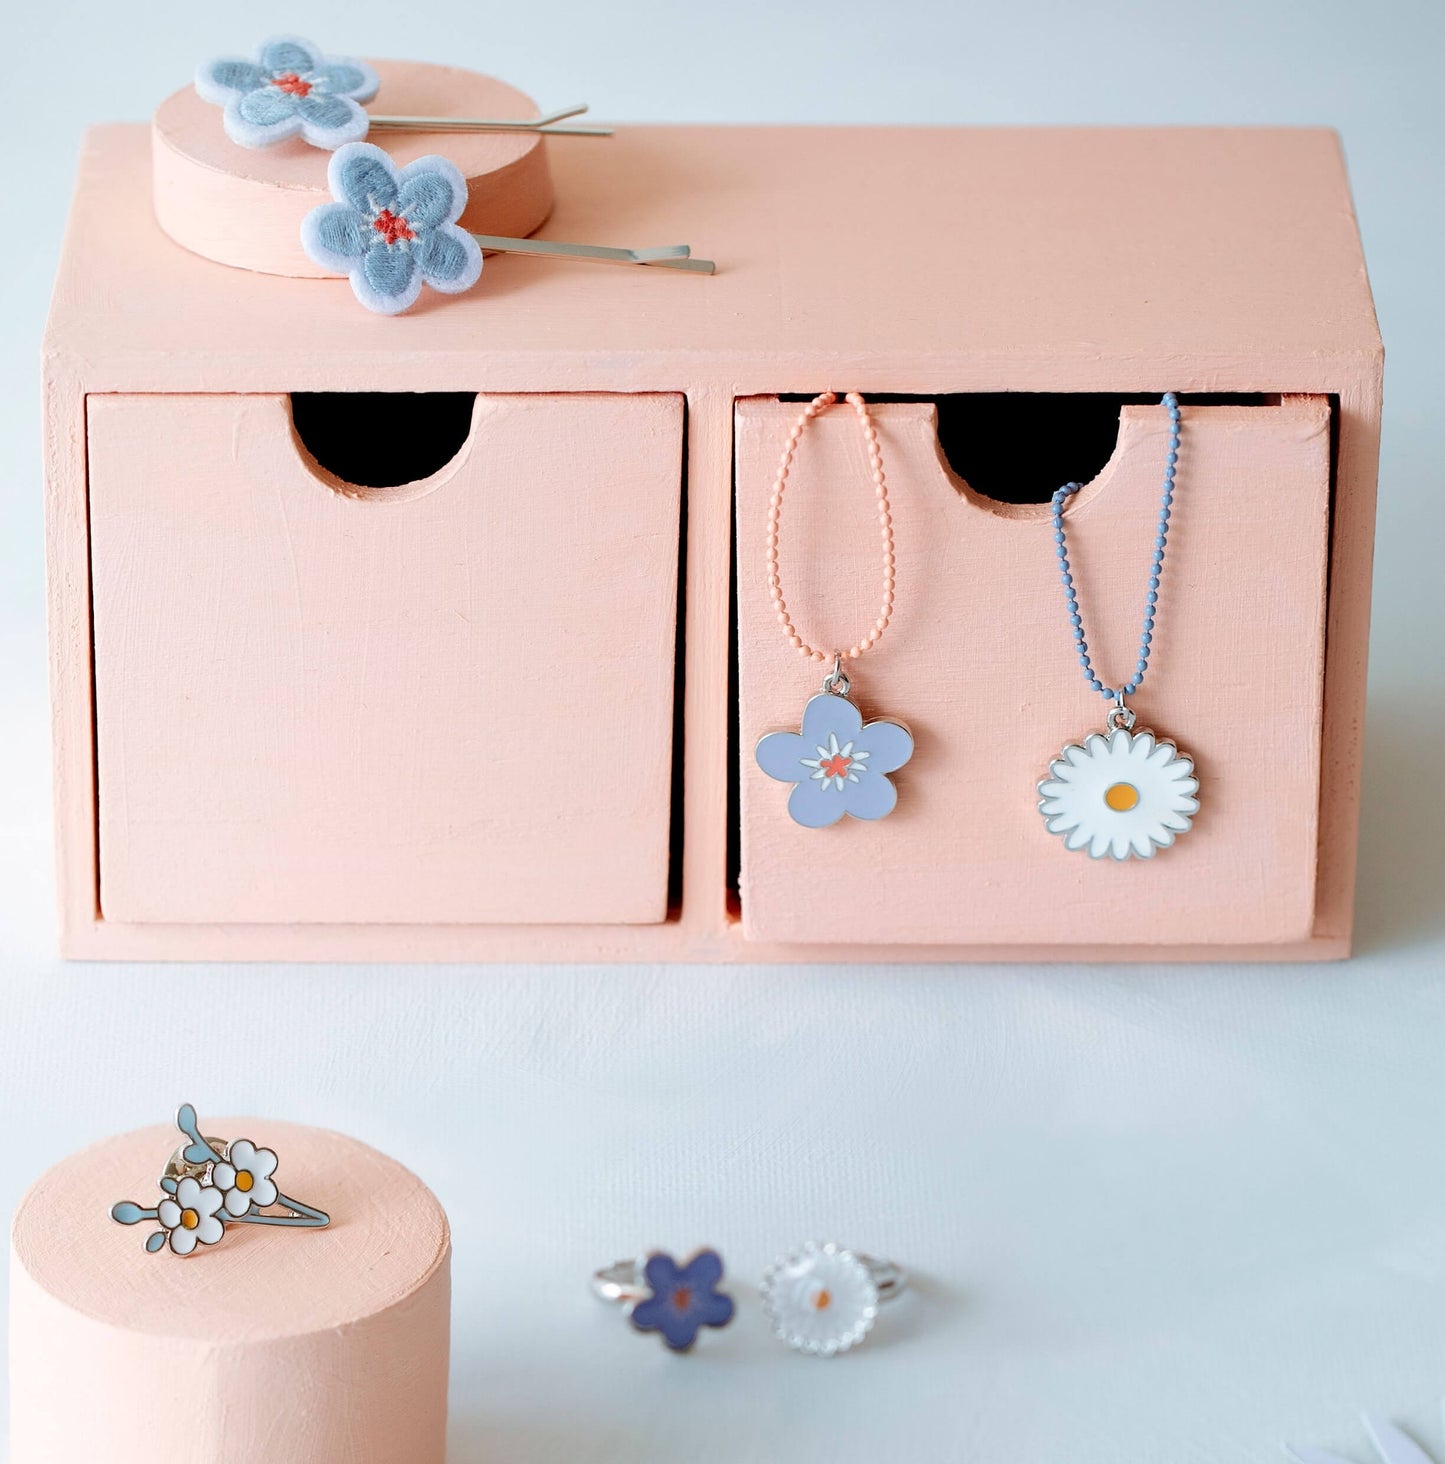 Flower Rings Daisy & Violet set of 2 in nice gift box - Unik by Nature